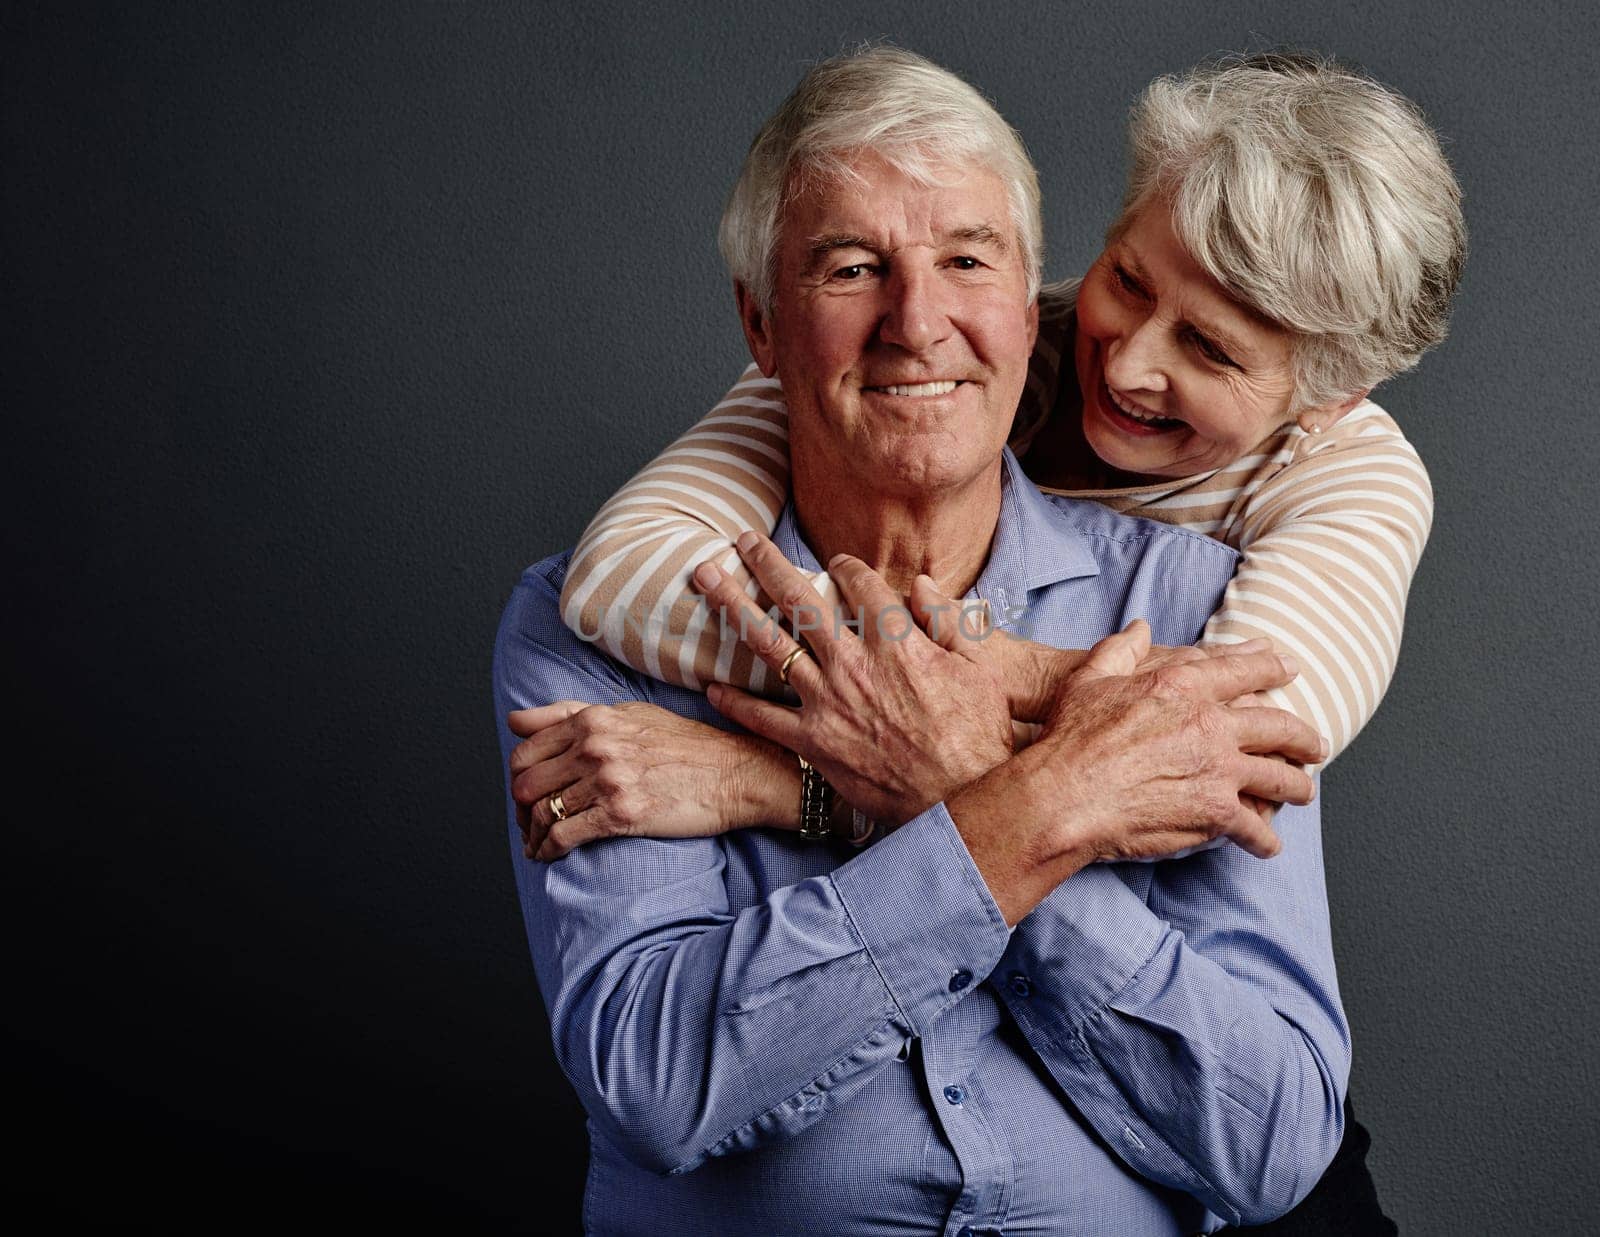 Its a match made in heaven. Studio portrait of an affectionate senior couple posing against a grey background